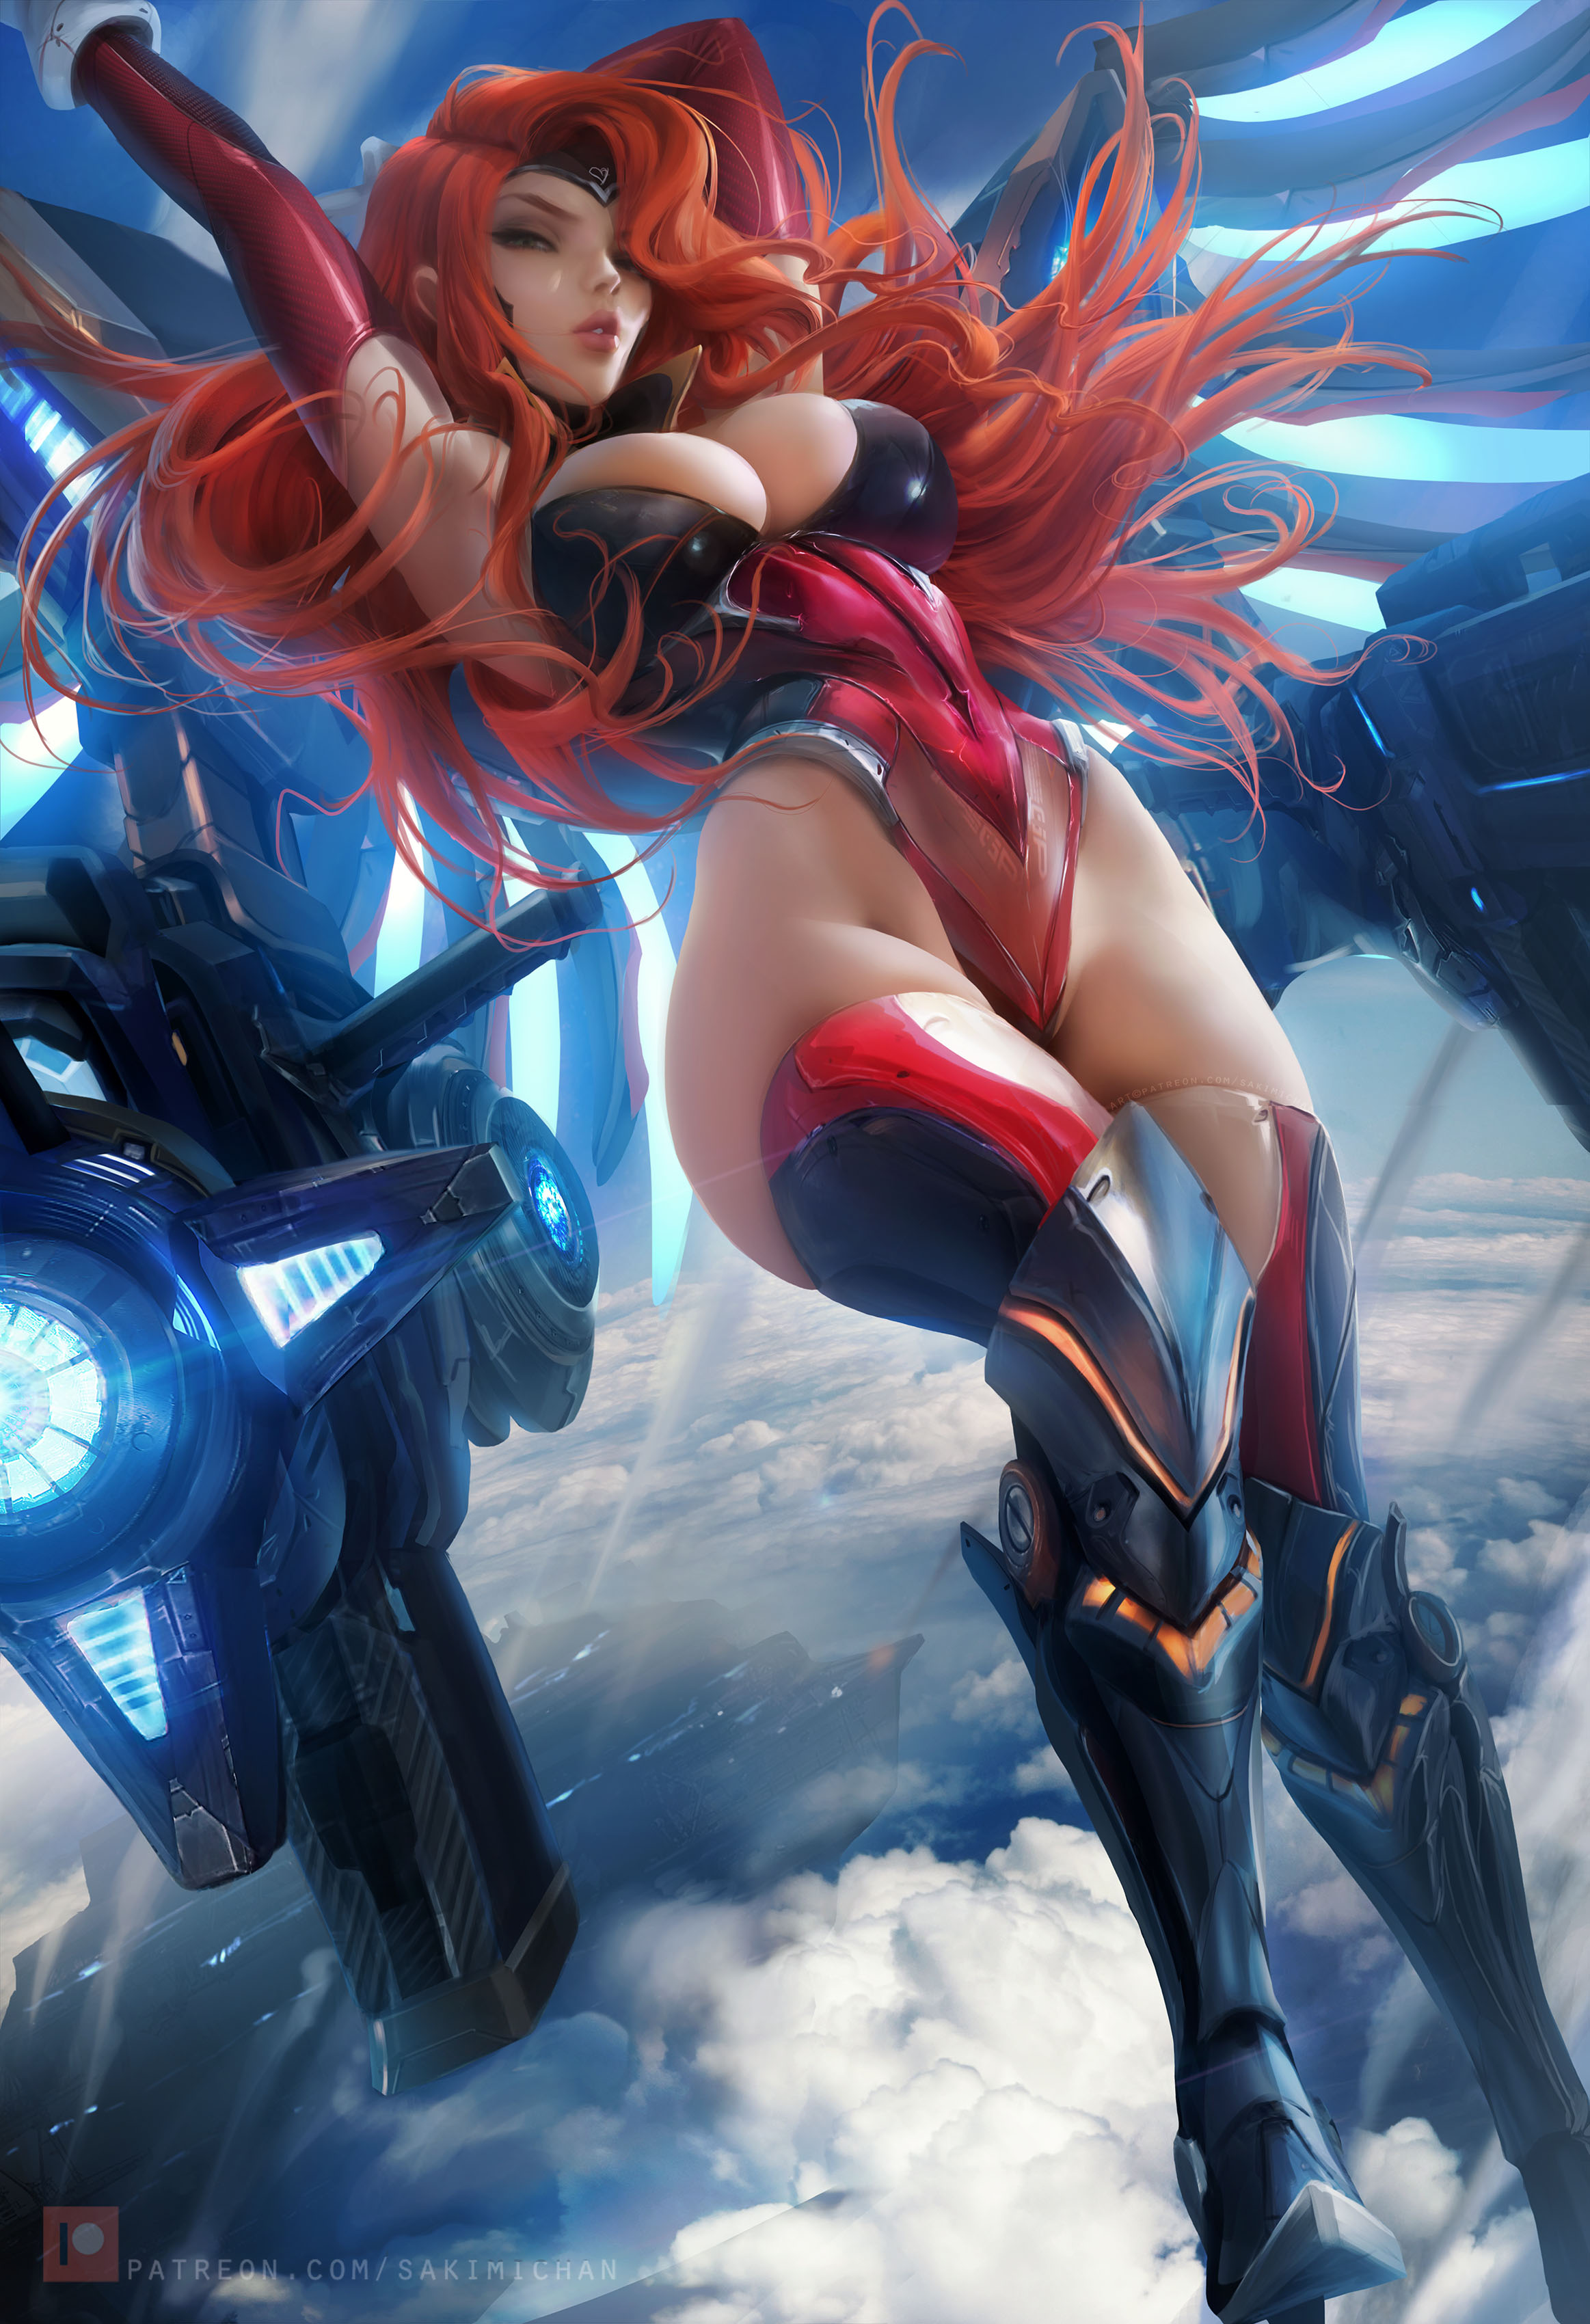 General 2326x3400 Miss Fortune (League of Legends) League of Legends video games video game characters video game girls women fantasy girl redhead long hair looking at viewer cleavage big boobs bodysuit thigh-highs weapon wings flying sky clouds video game art fan art artwork digital art drawing Riot Games Sakimichan